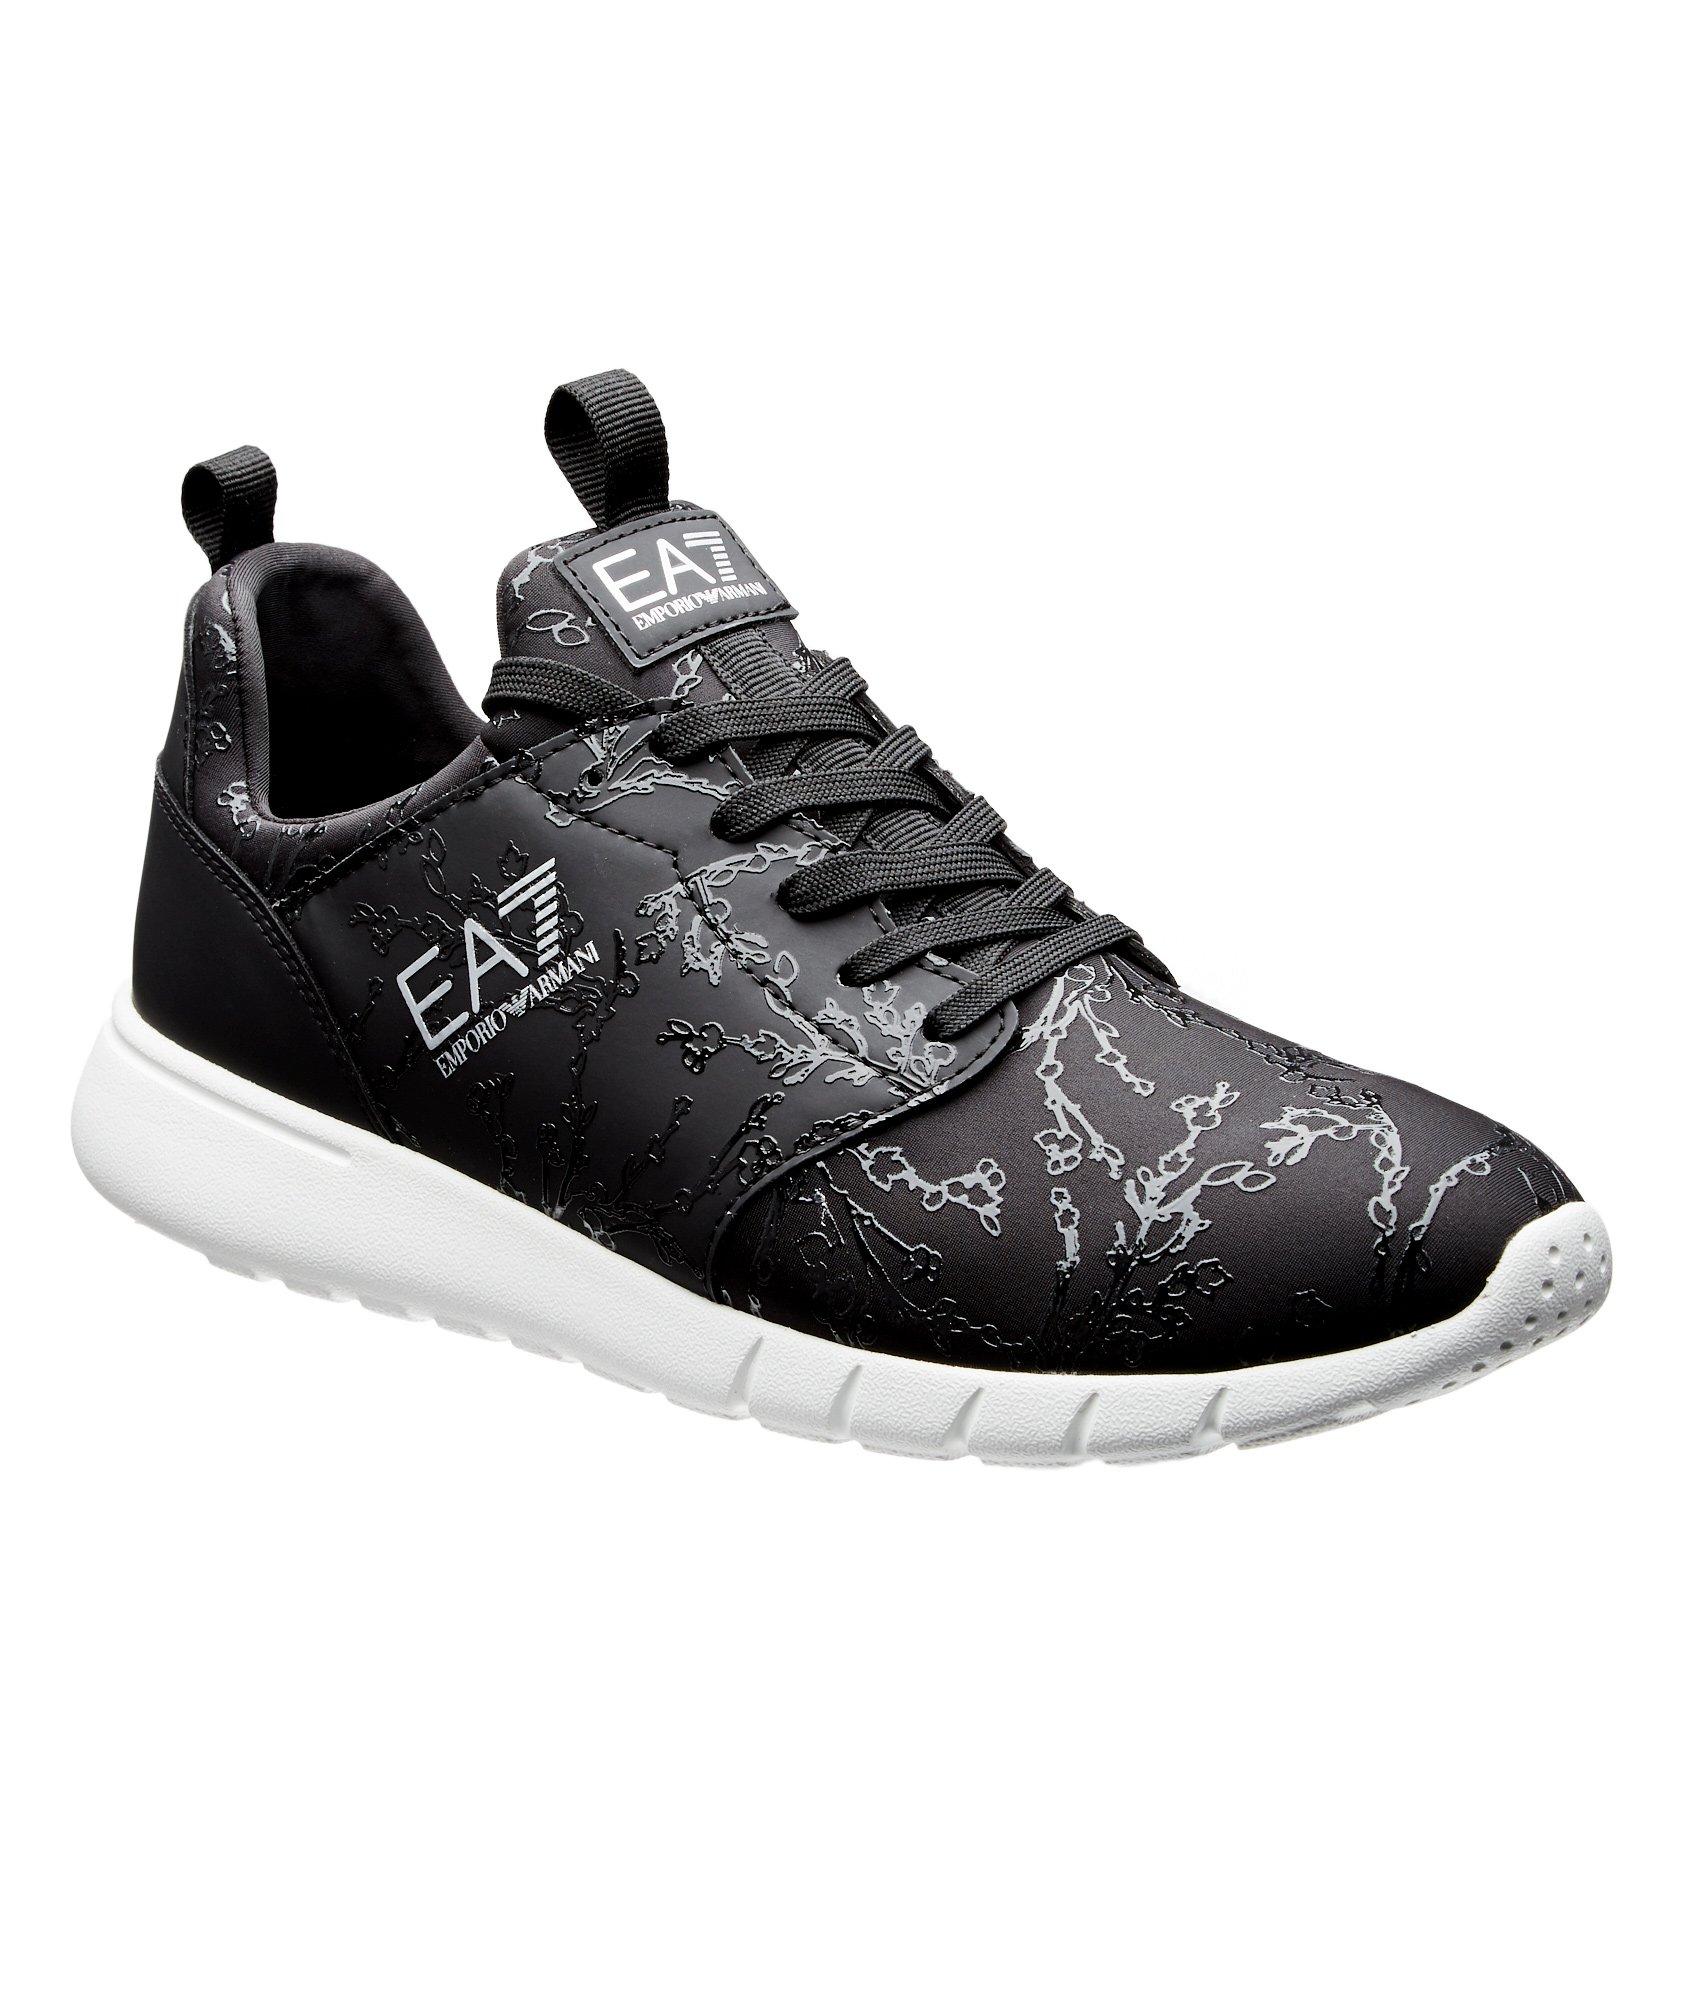 Chaussure sport, collection EA7 image 0